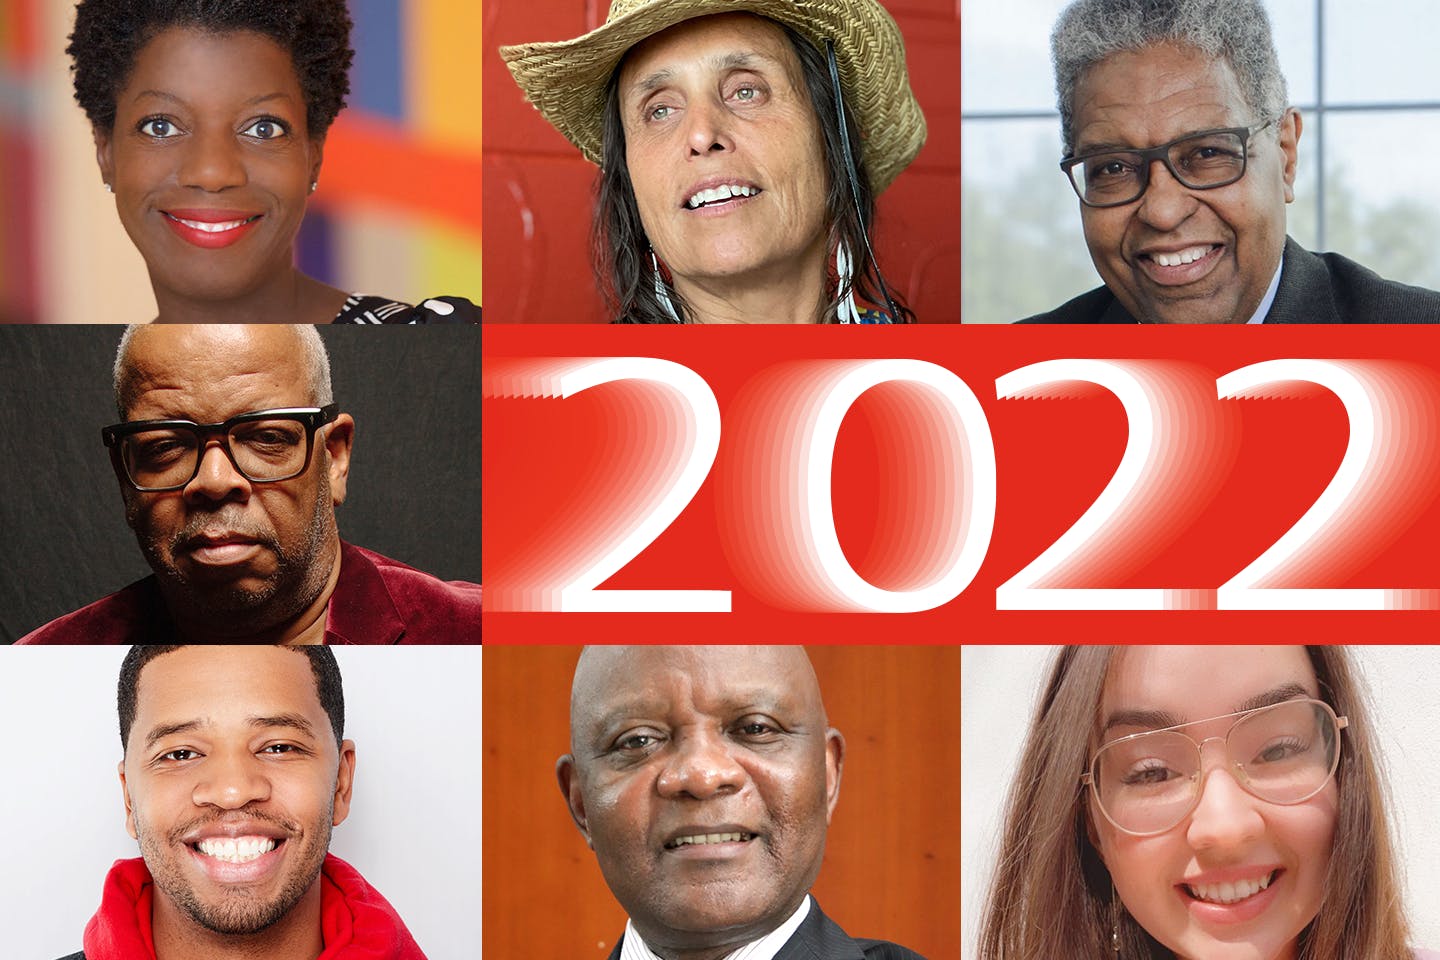 2022 Honorary Degree recipients and speakers